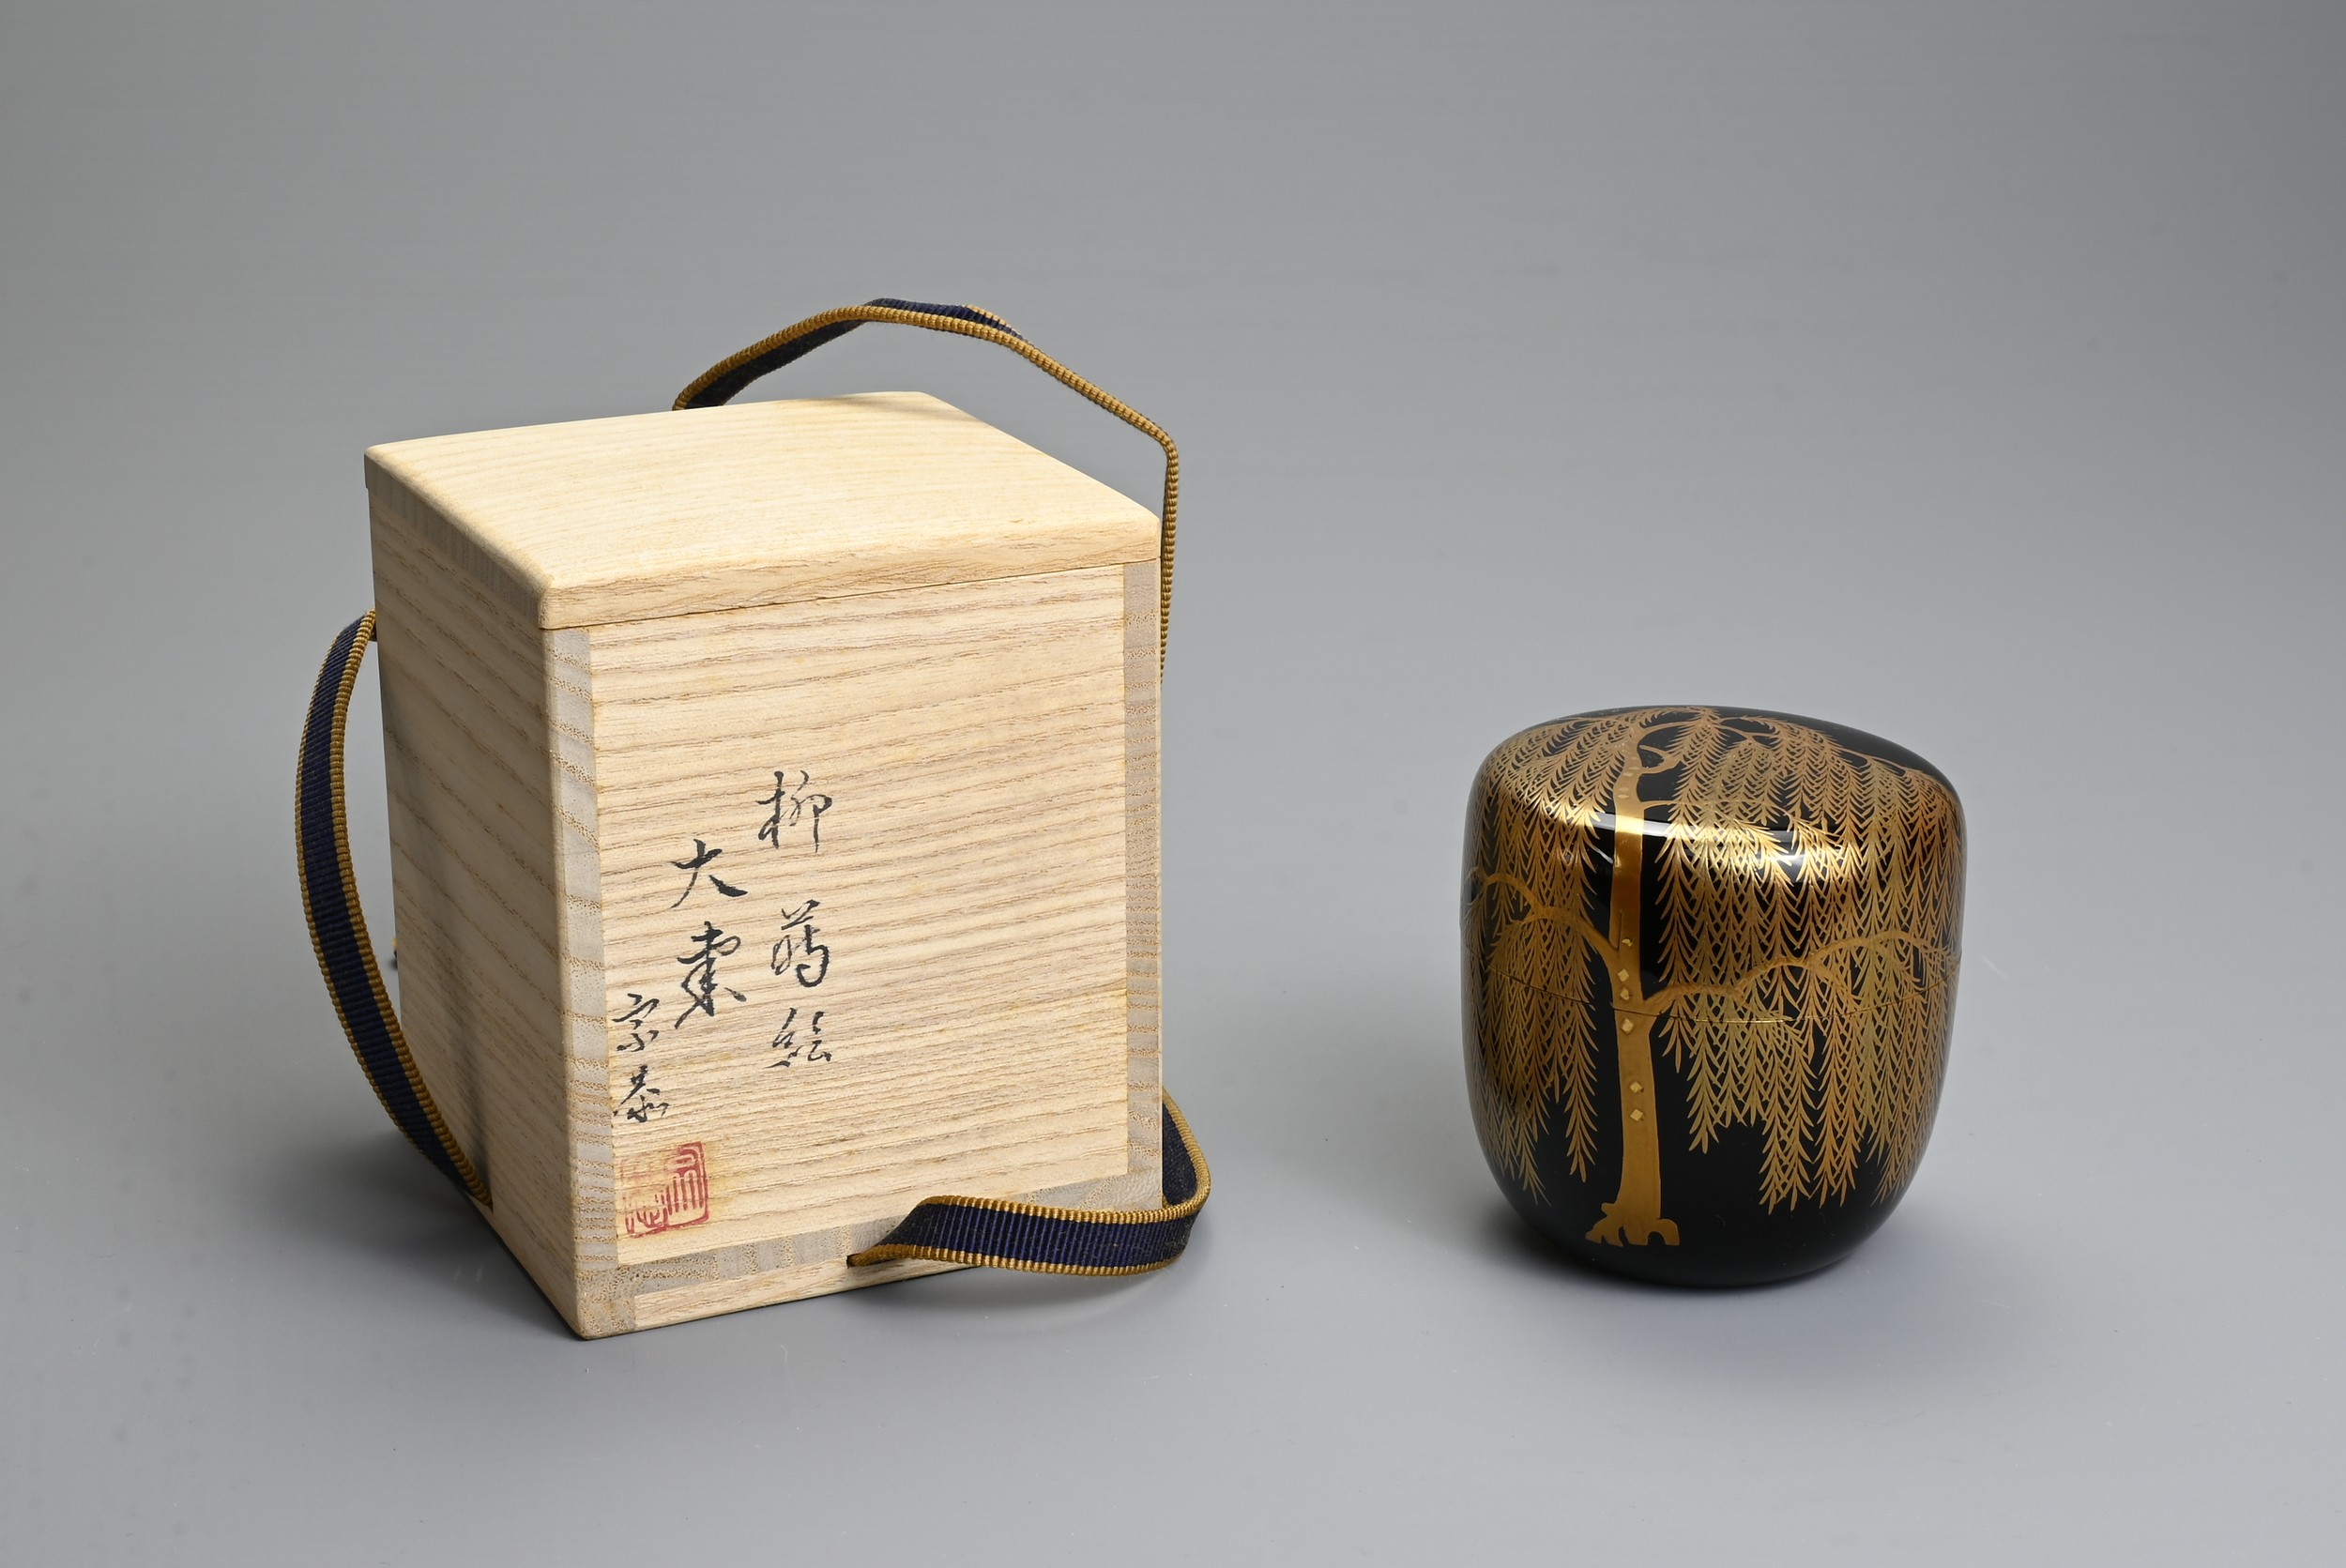 A CONTEMPORARY JAPANESE BLACK LACQUER AND GOLD TEA CADDY. Decorated by Nakamura Muneyuki with gold